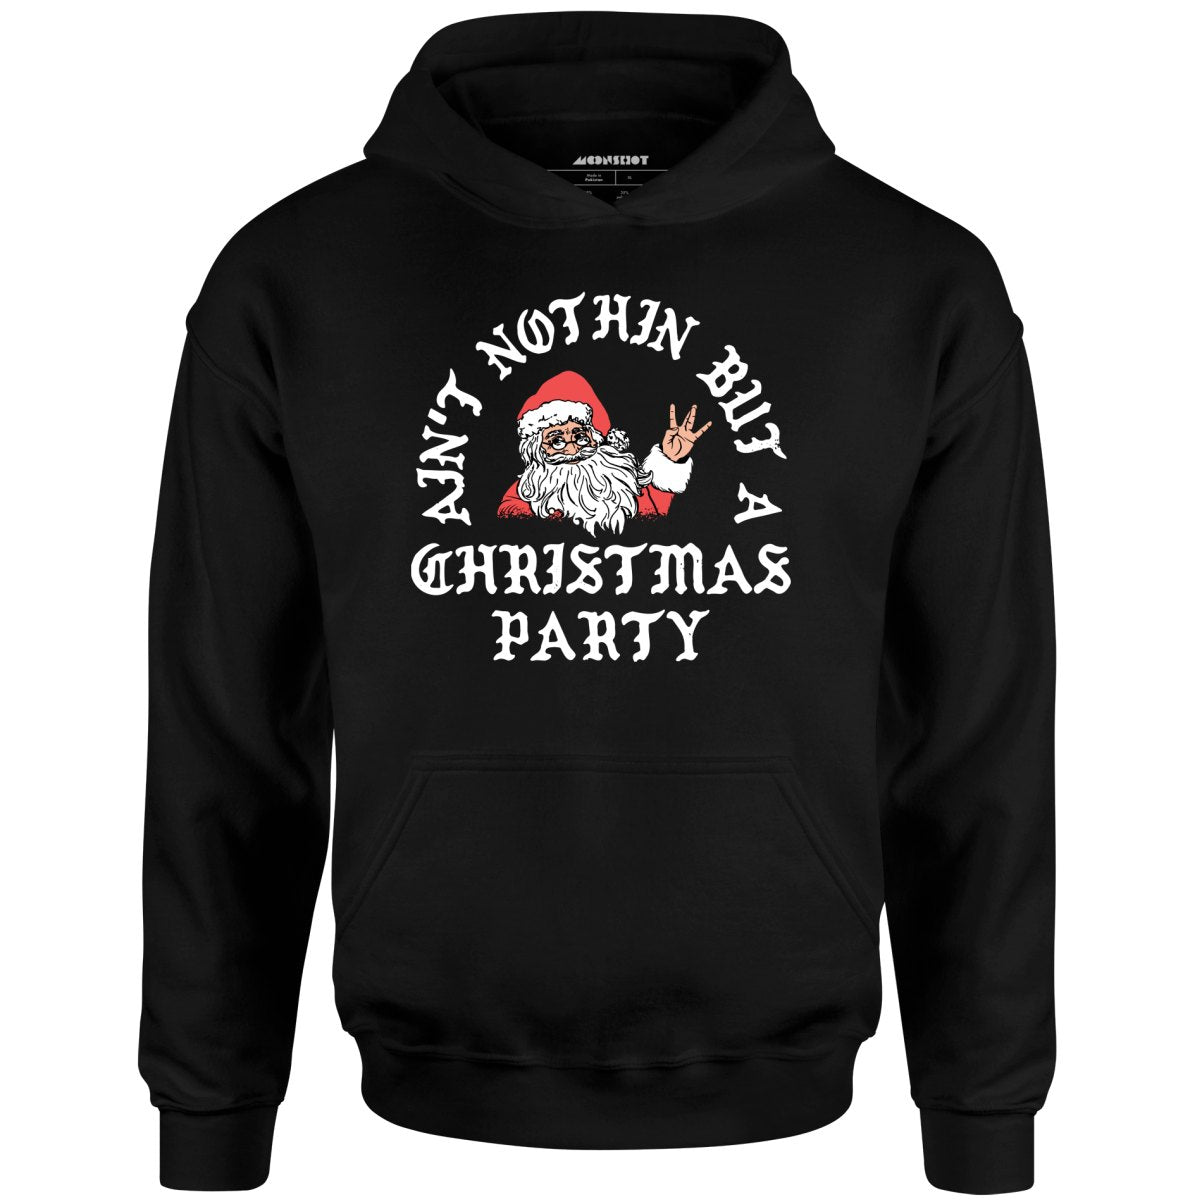 Ain't Nothin' But a Christmas Party - Unisex Hoodie